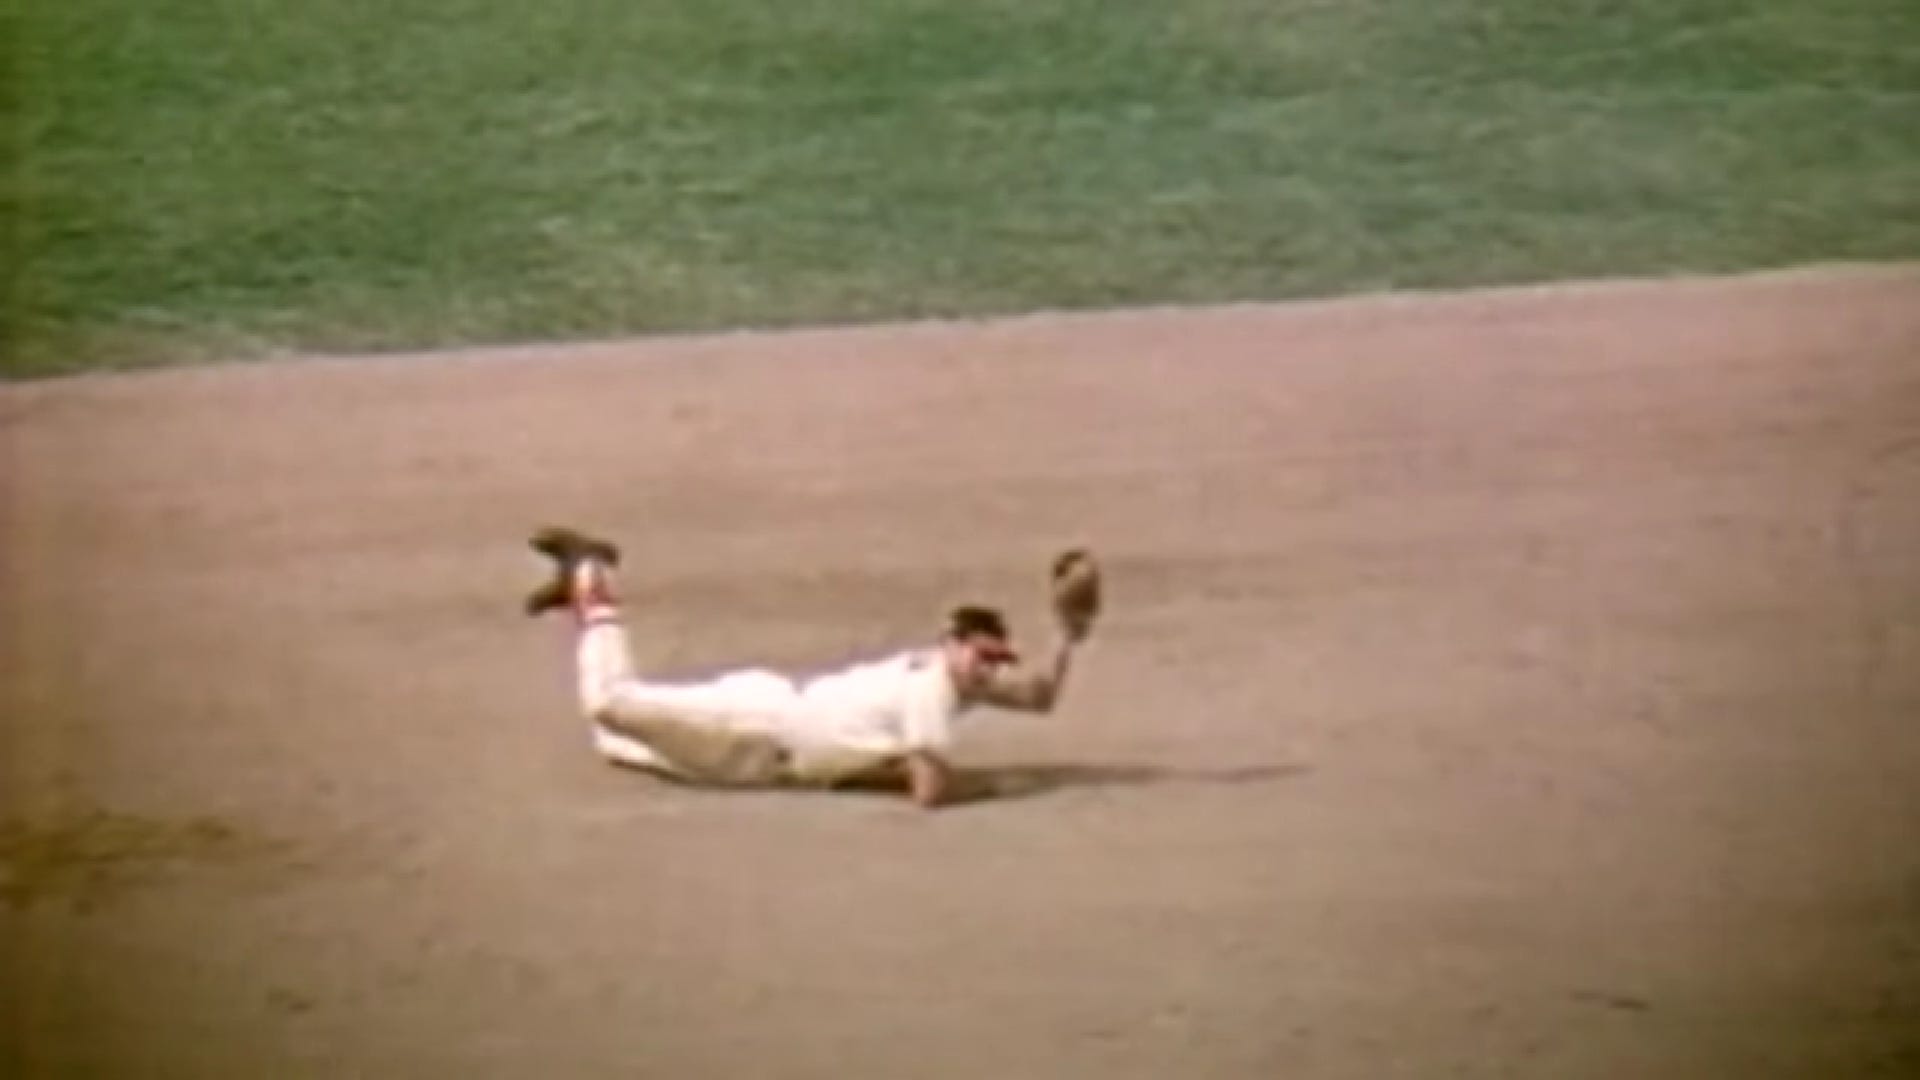 Remembering the greatness of Brooks Robinson in the 1970 World Series.